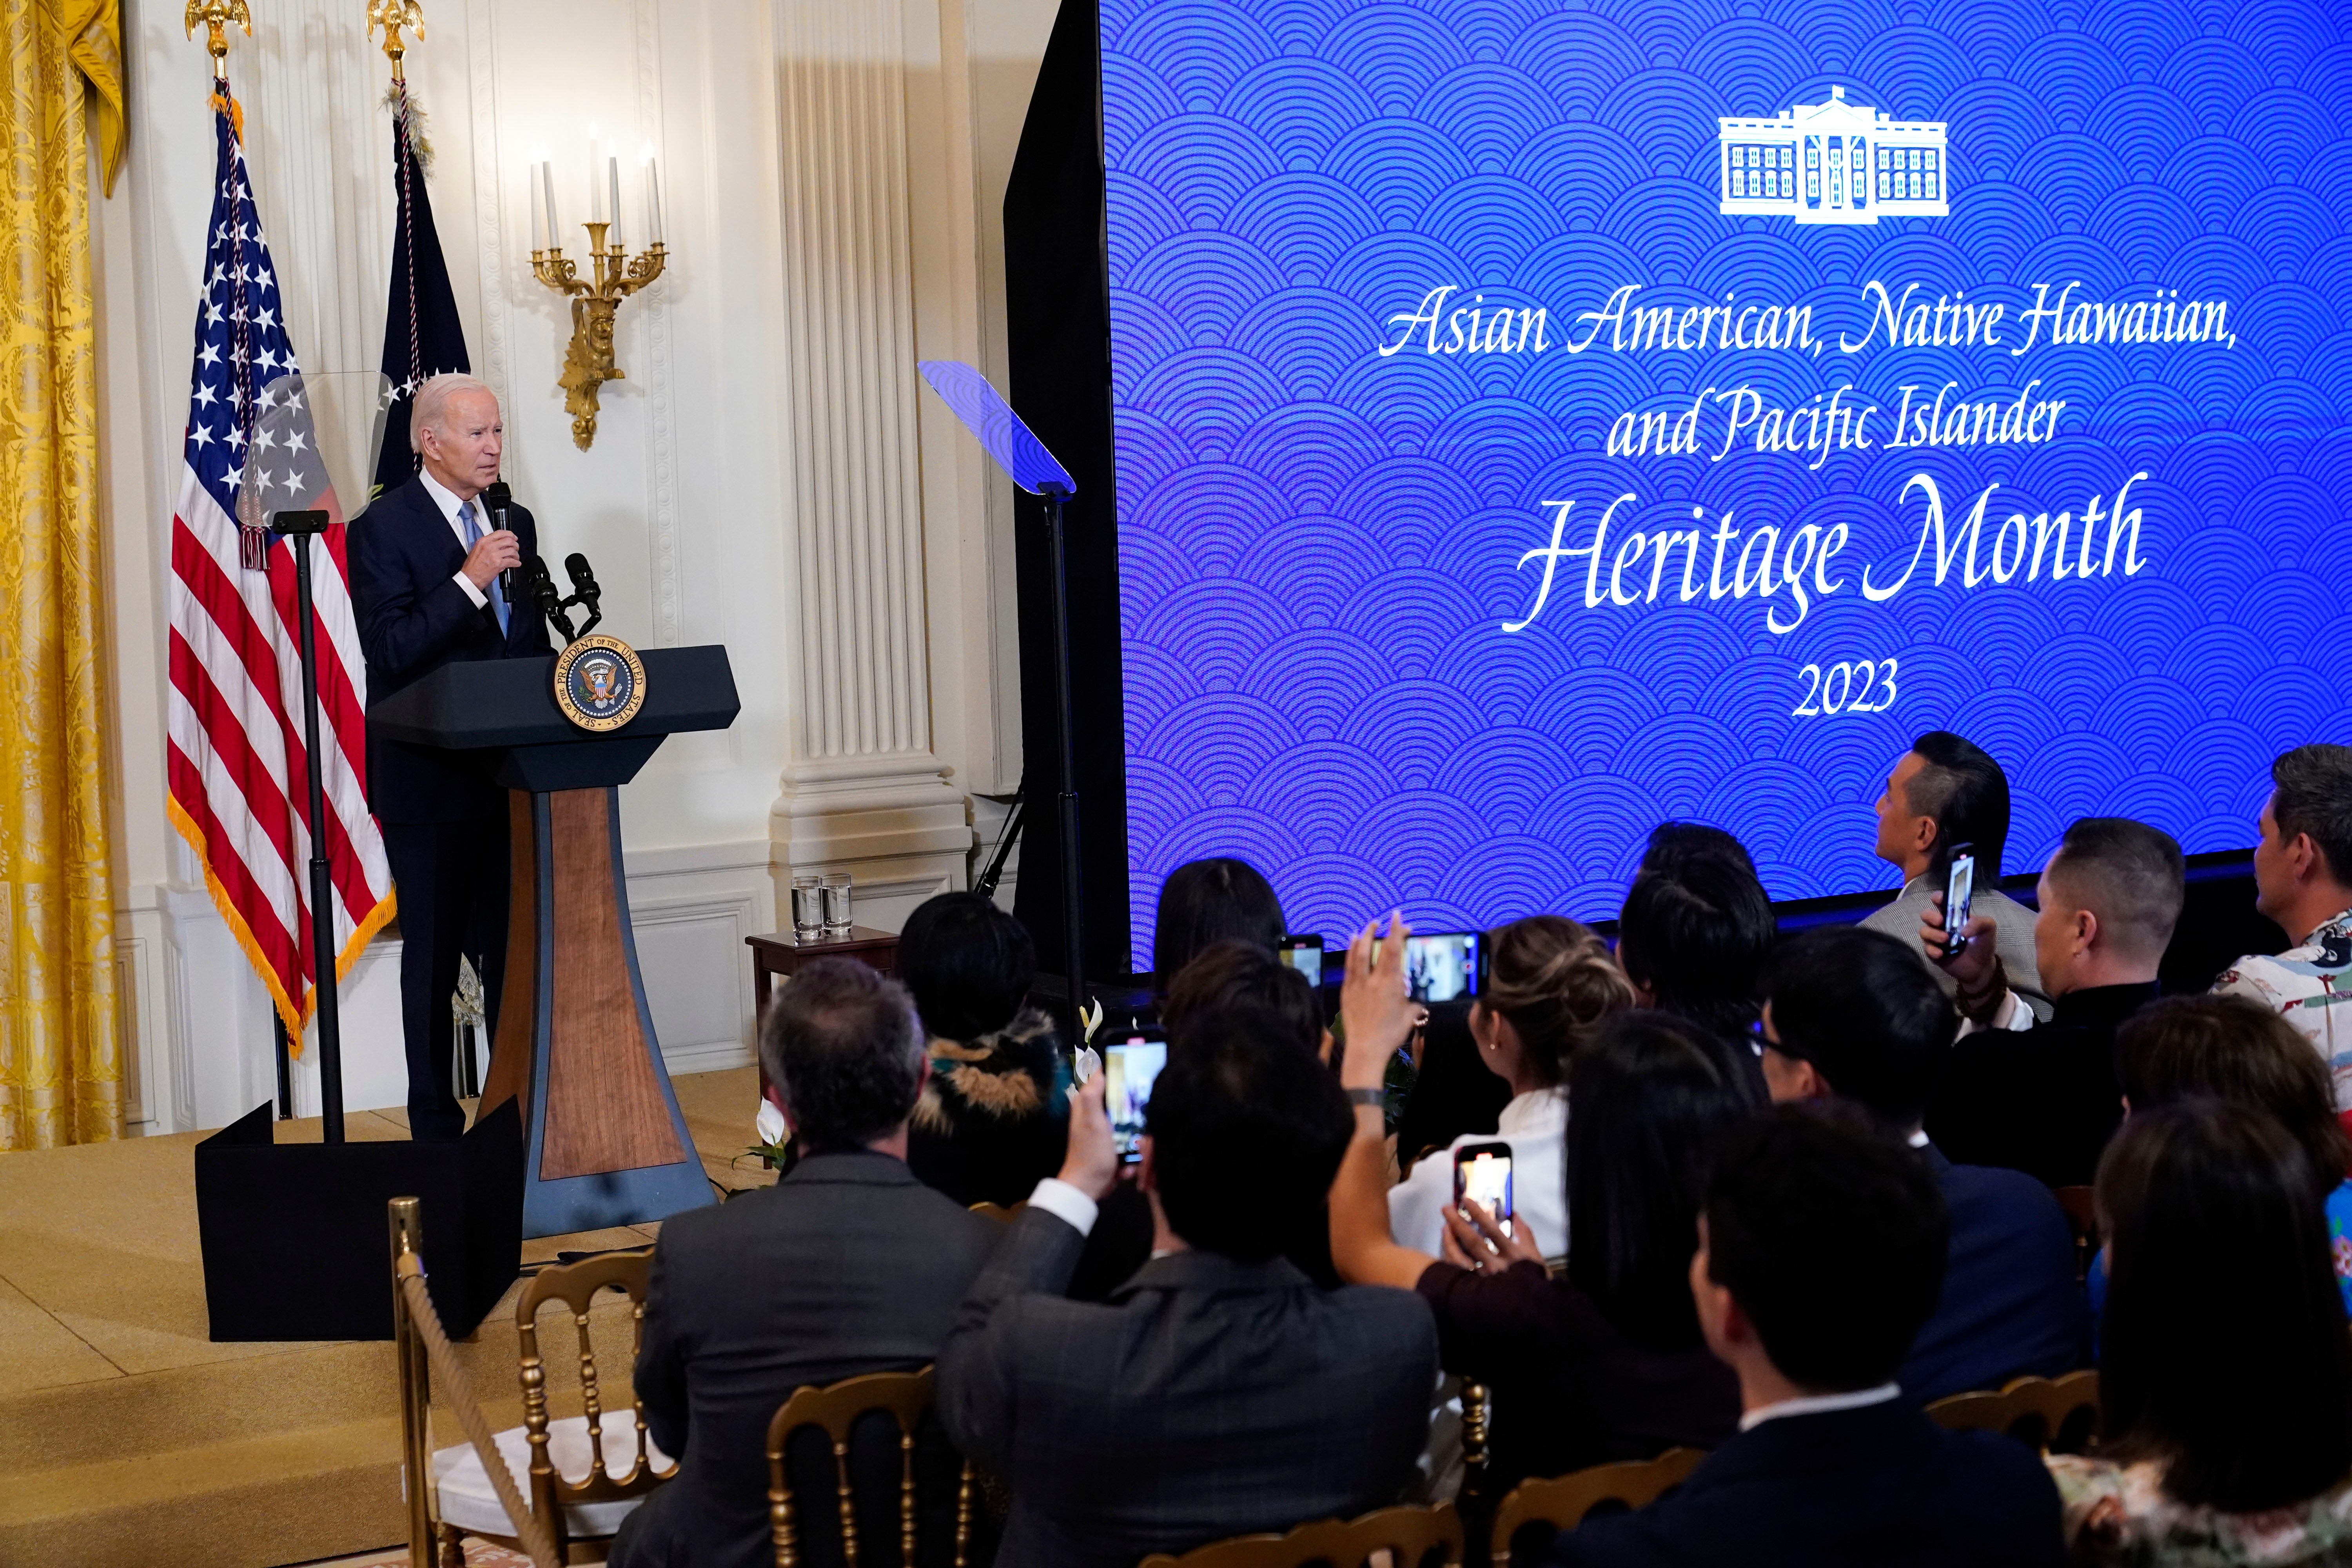 President Joe Biden speaks before a screening of the series "American Born Chinese" in the East Room of the White House in Washington, in celebration of Asian American, Native Hawaiian, and Pacific Islander Heritage Month, 8 May 2023 in this file photo